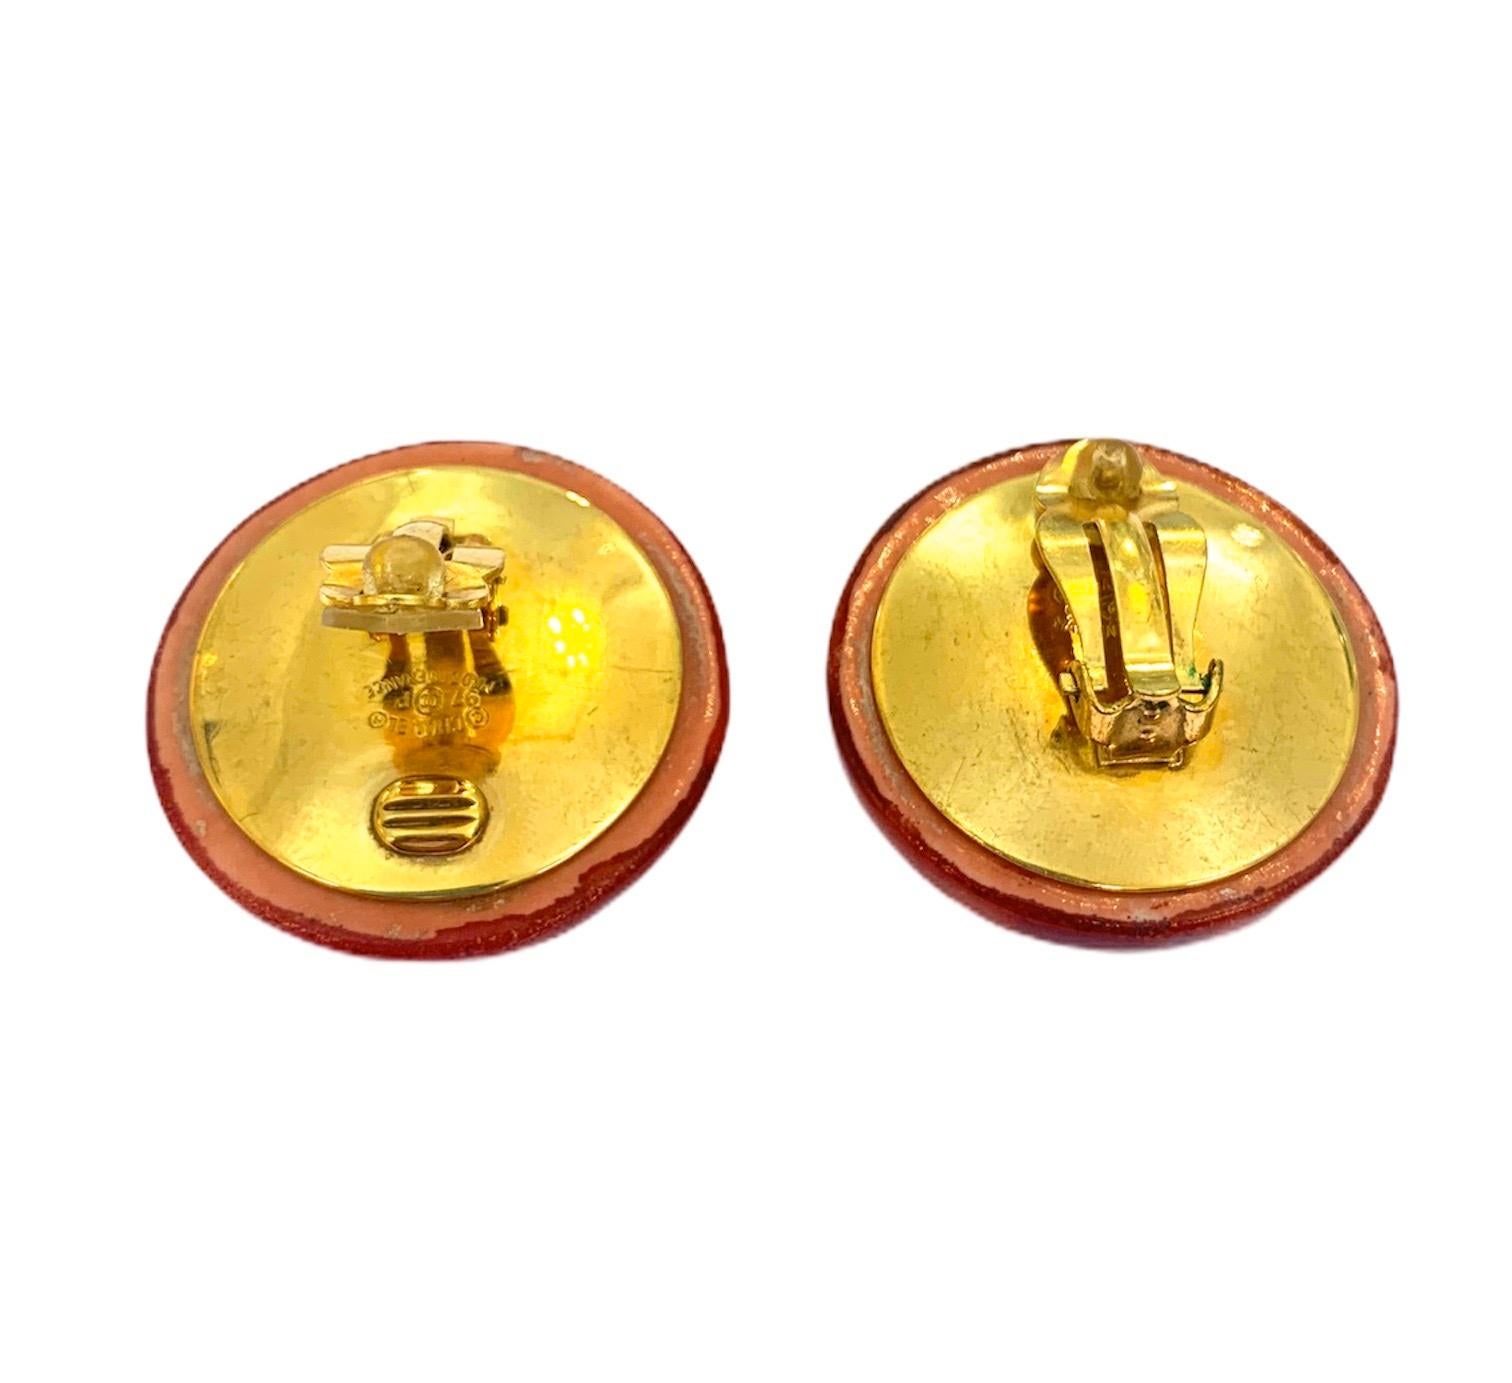 Chanel button earrings
Year 1997
Closing with clips
Made of golden metal 
Ceramic
Red enamel
With Chanel Paris logo written 
3cm diameter
Full box
Great conditions 